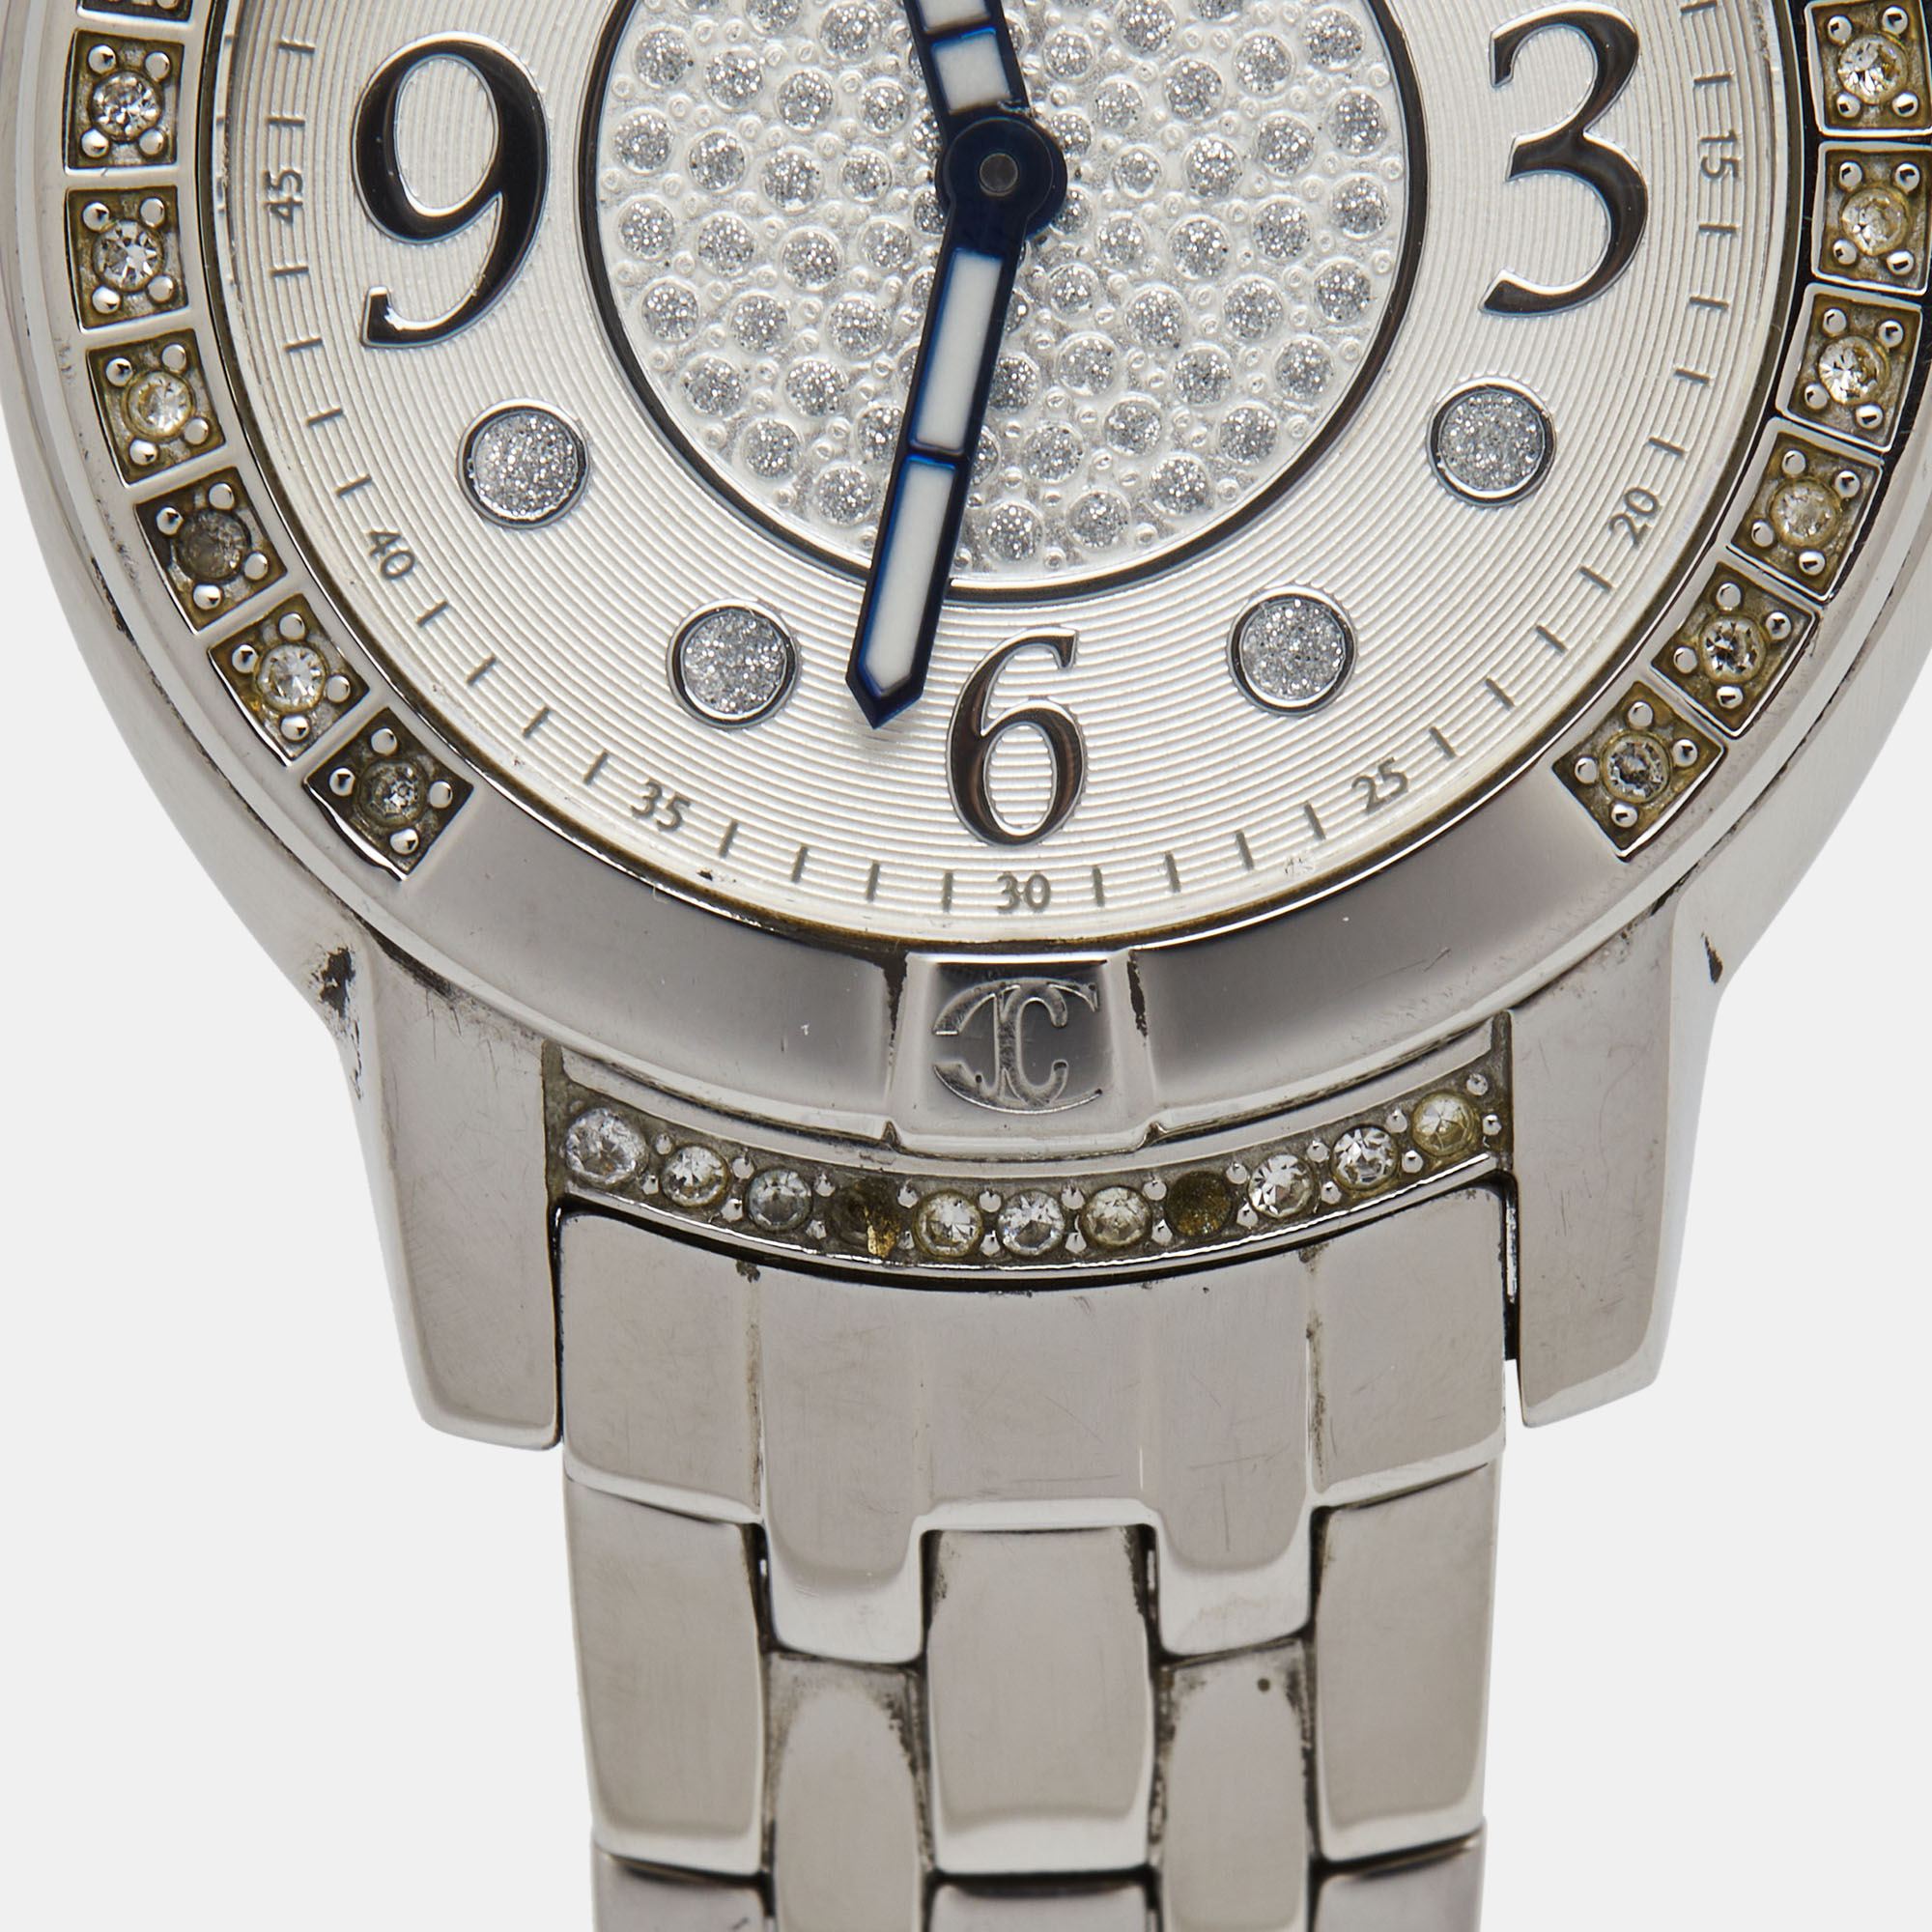 Just Cavalli Silver Crystal Embellished Stainless Steel R7253161515 Women's Wristwatch 34 Mm